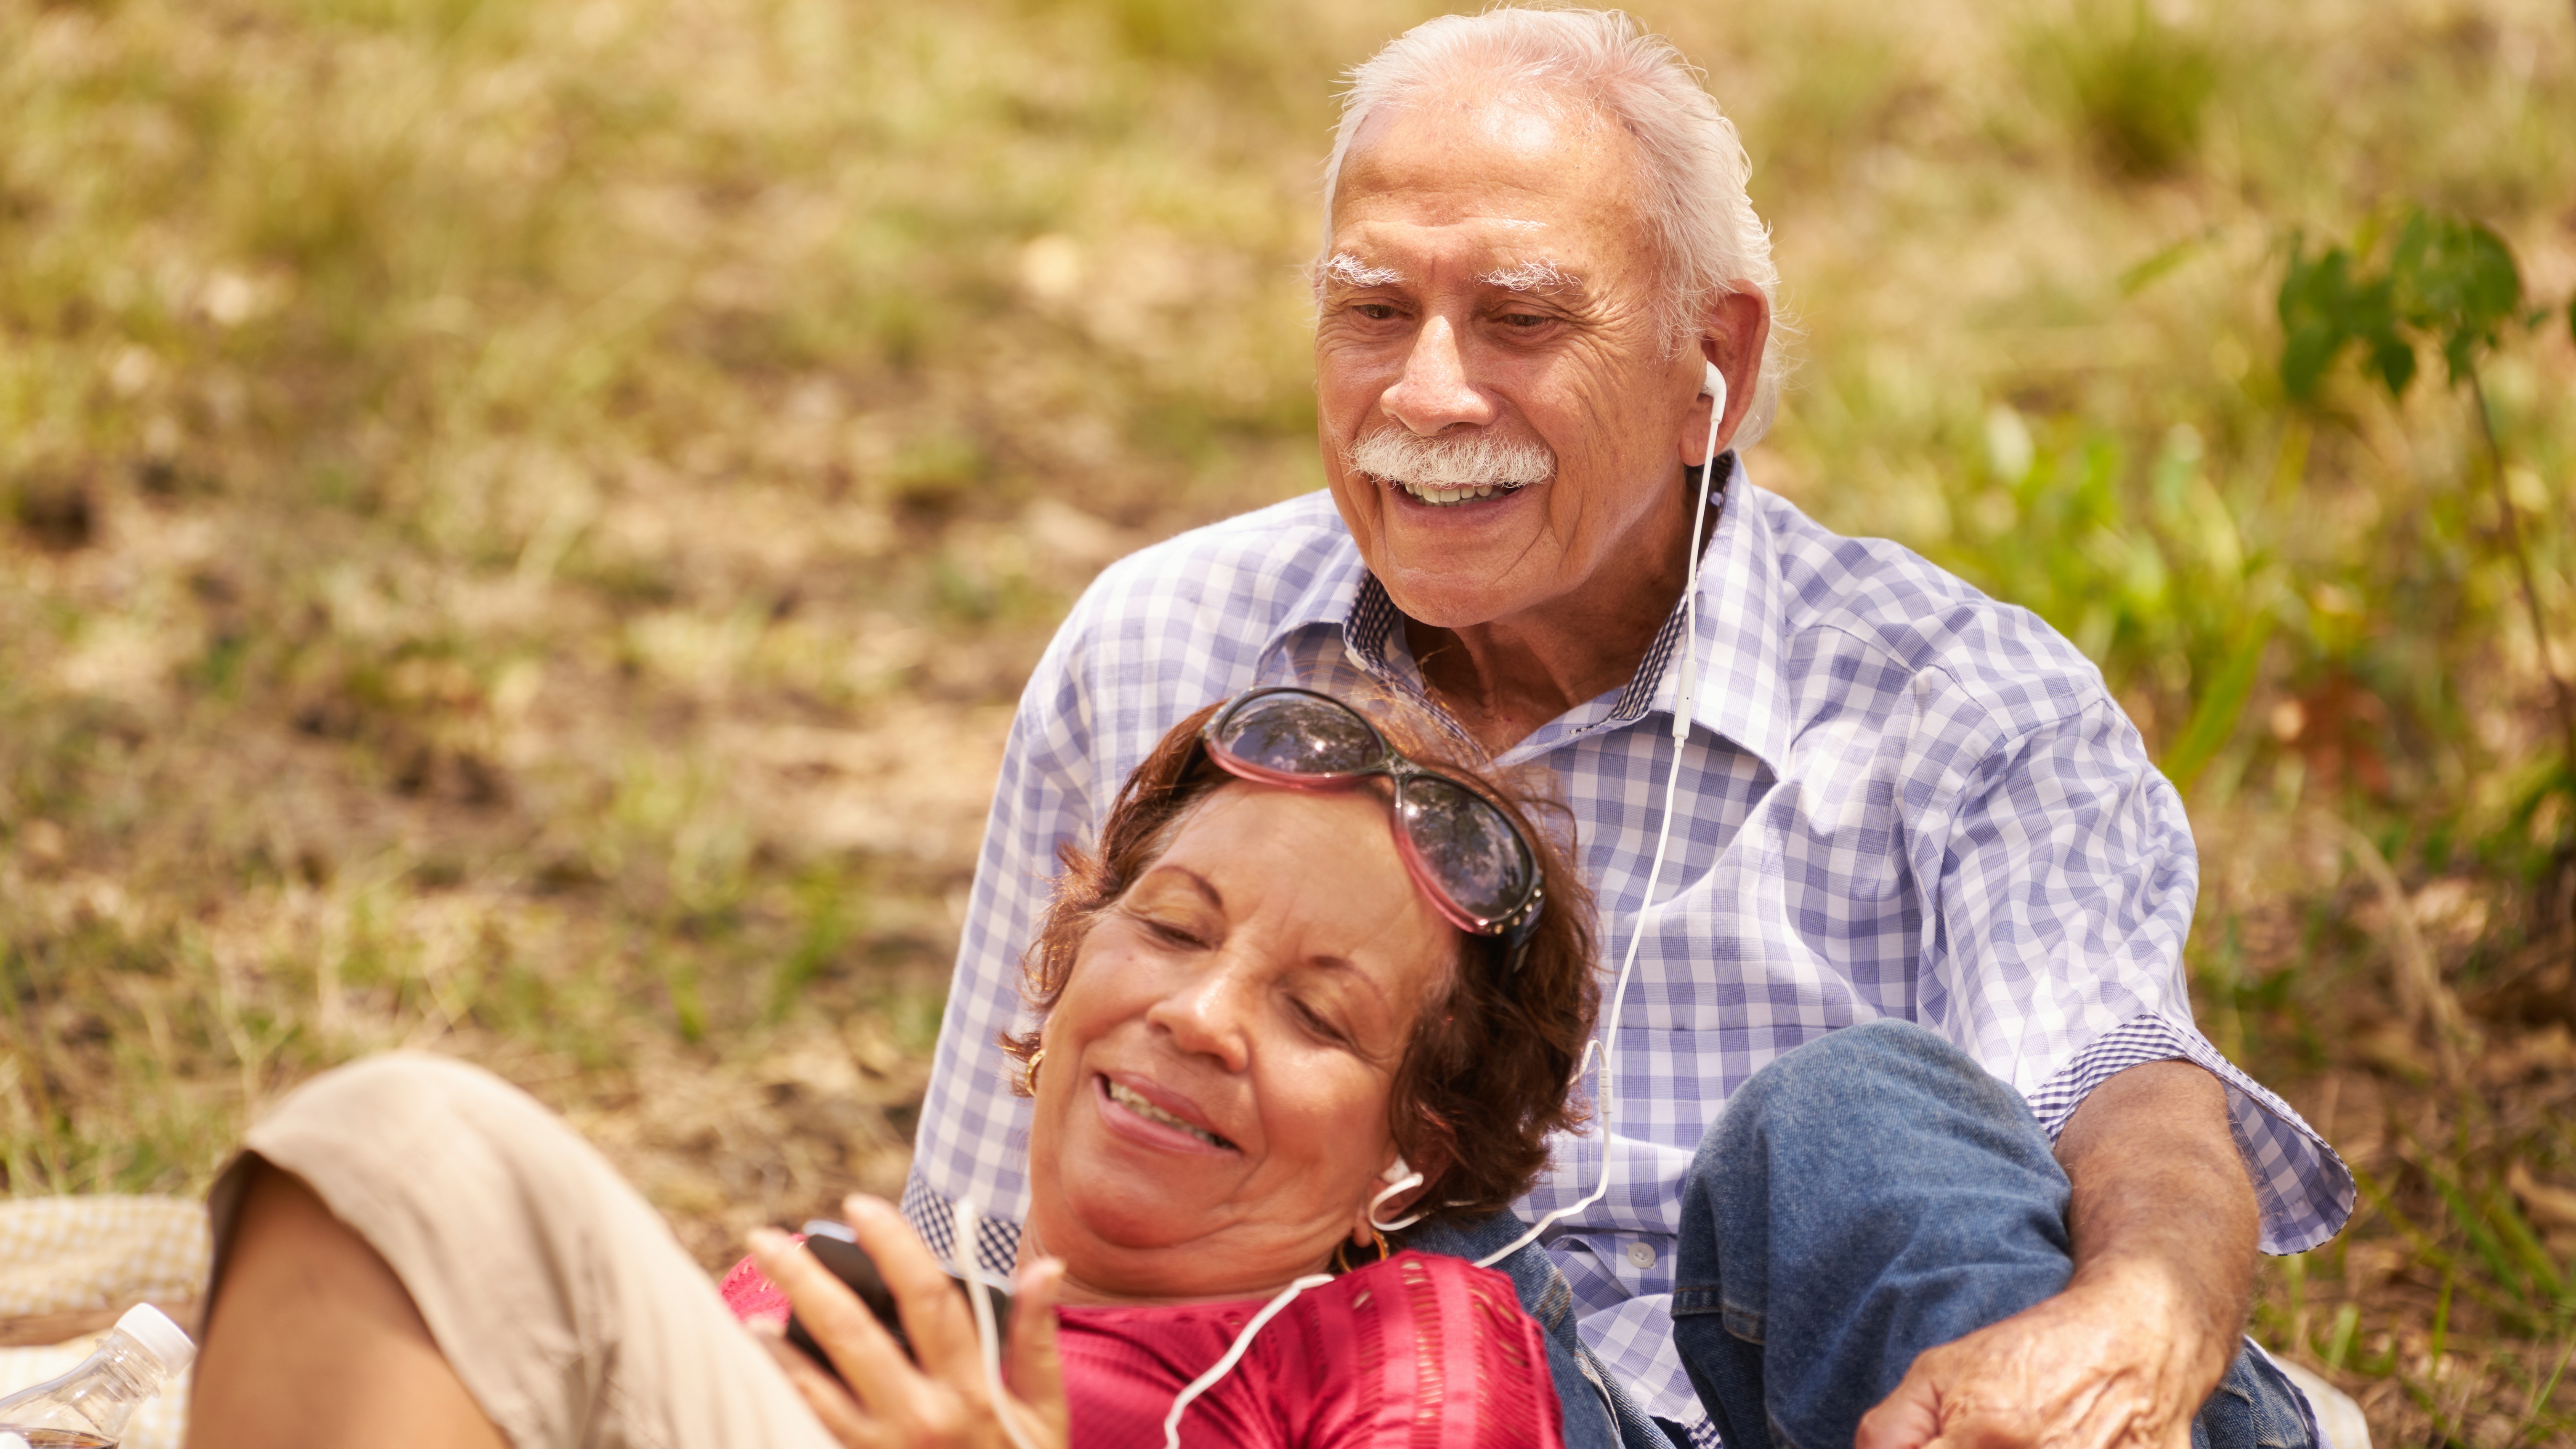 a senior couple, an elderly man and woman in park listening to music with earbuds or headphones